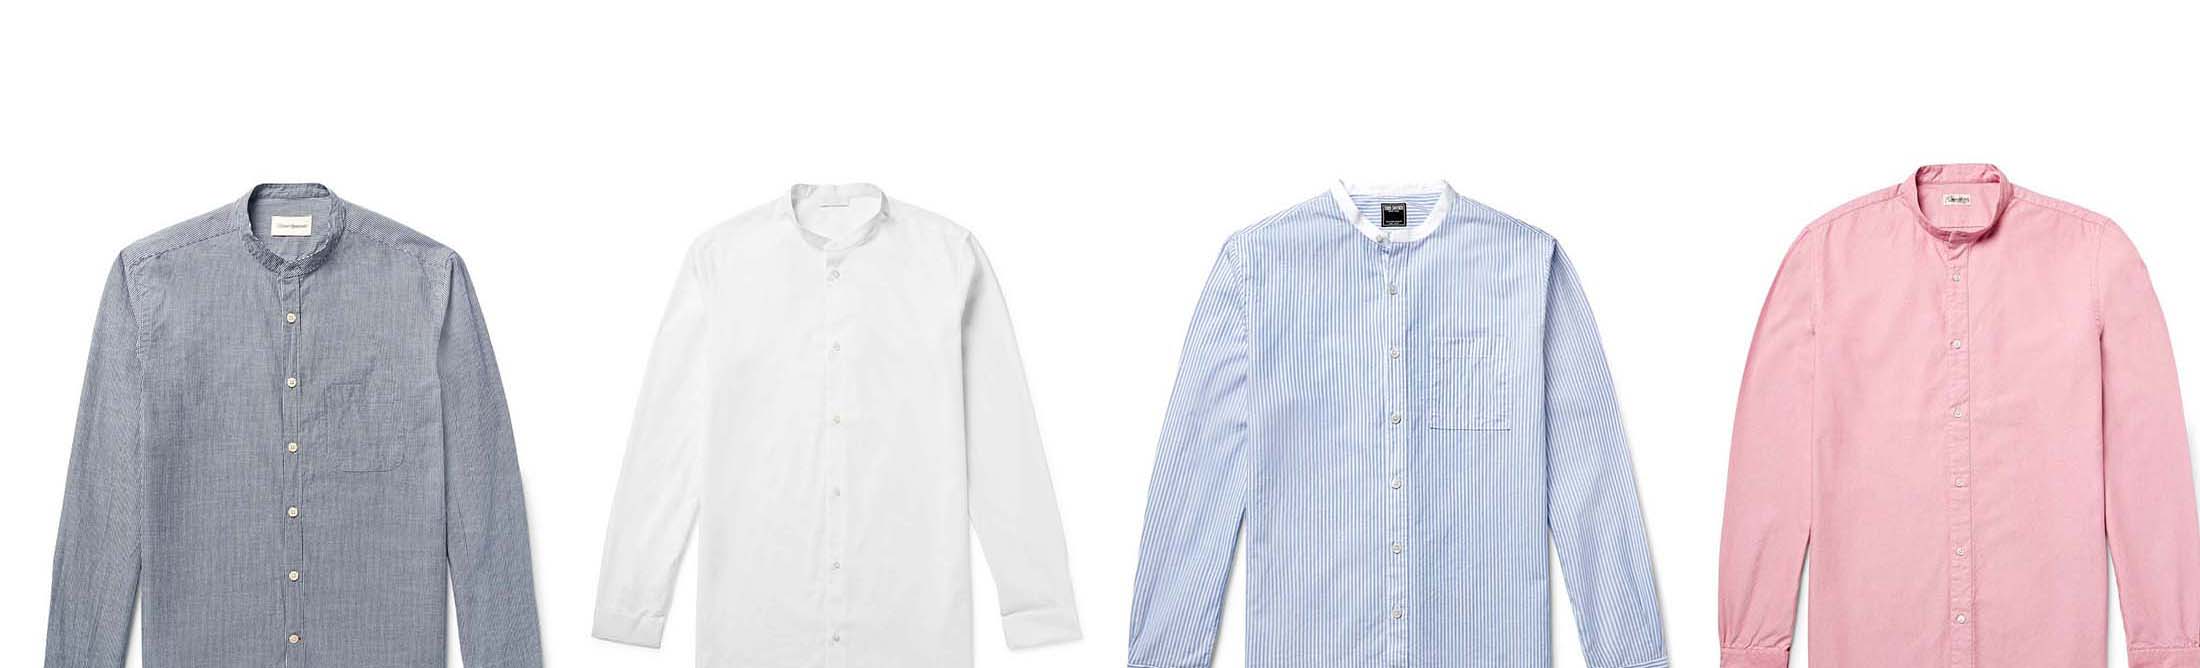 It’s Time to Talk About the Collarless Dress Shirt - Bloomberg